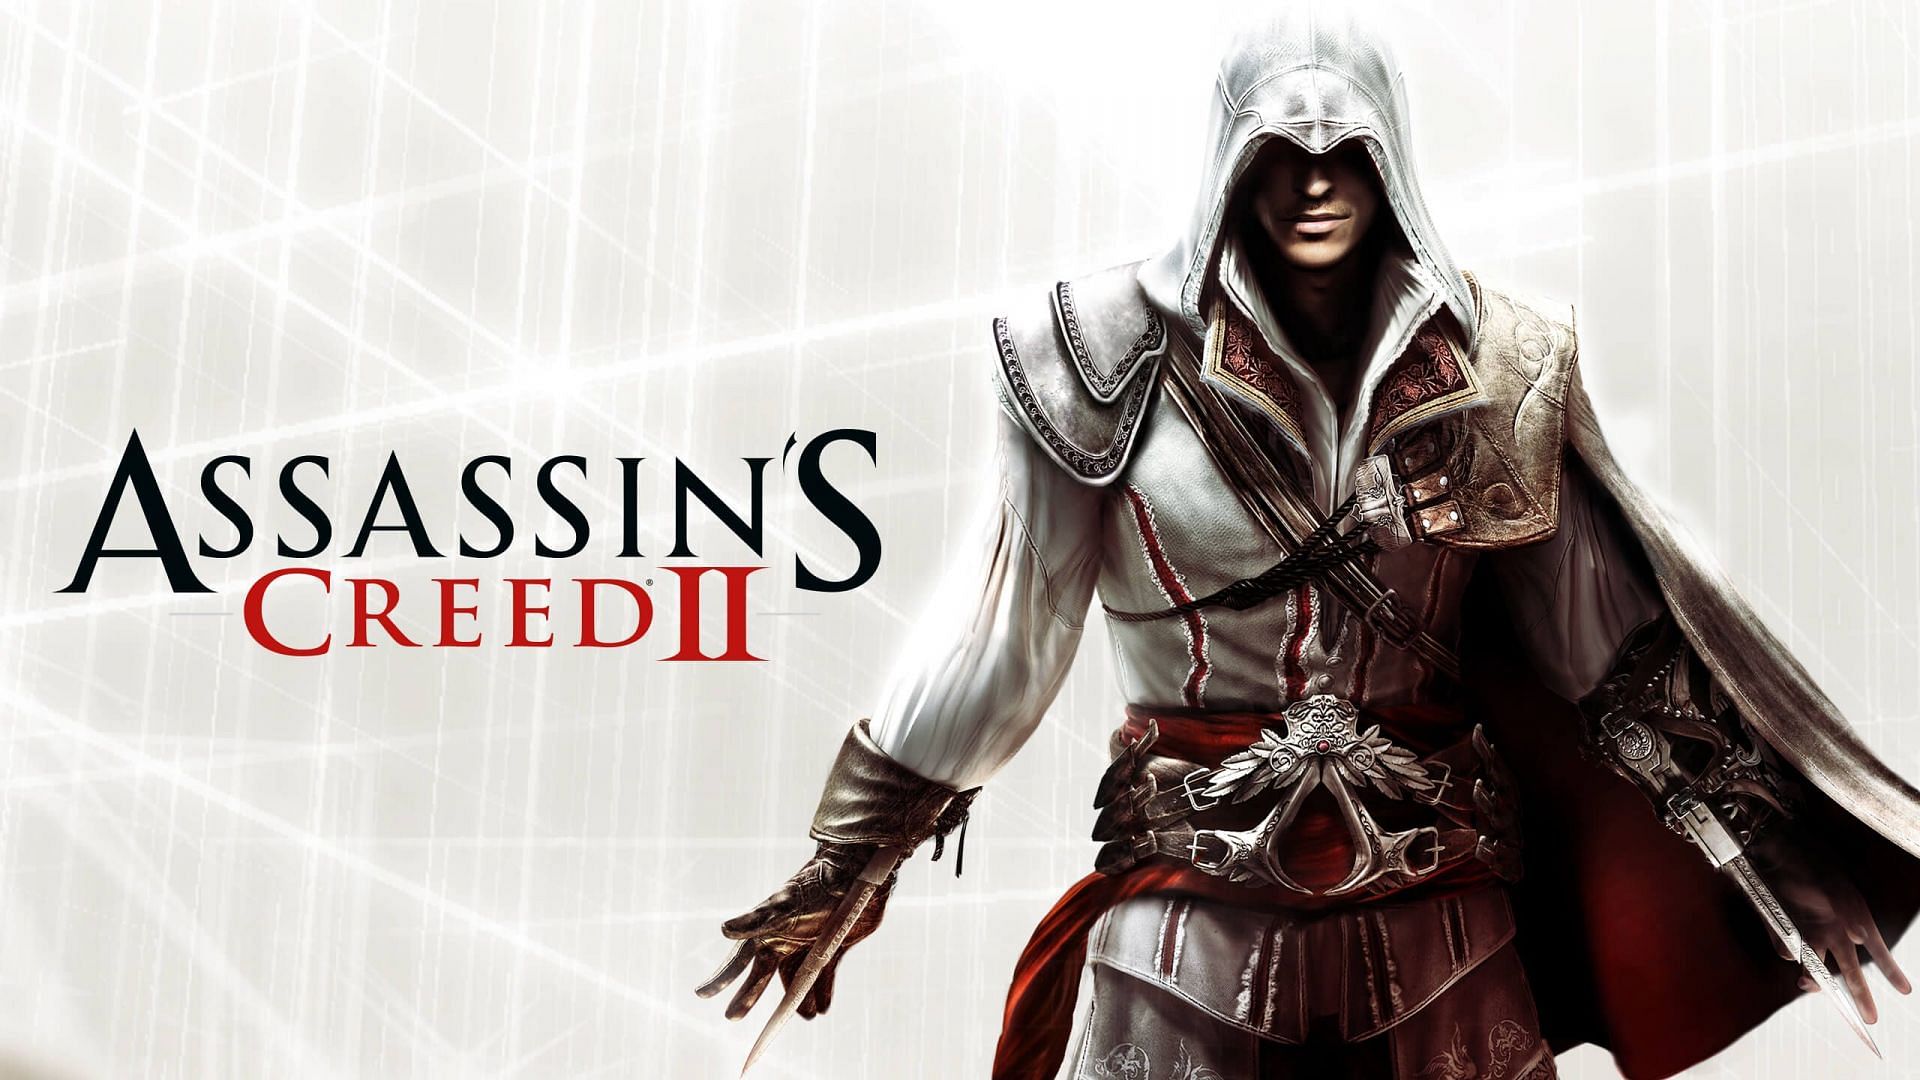 Assassin&#039;s Creed II will be the only physical game in the collection (Image via Ubisoft)